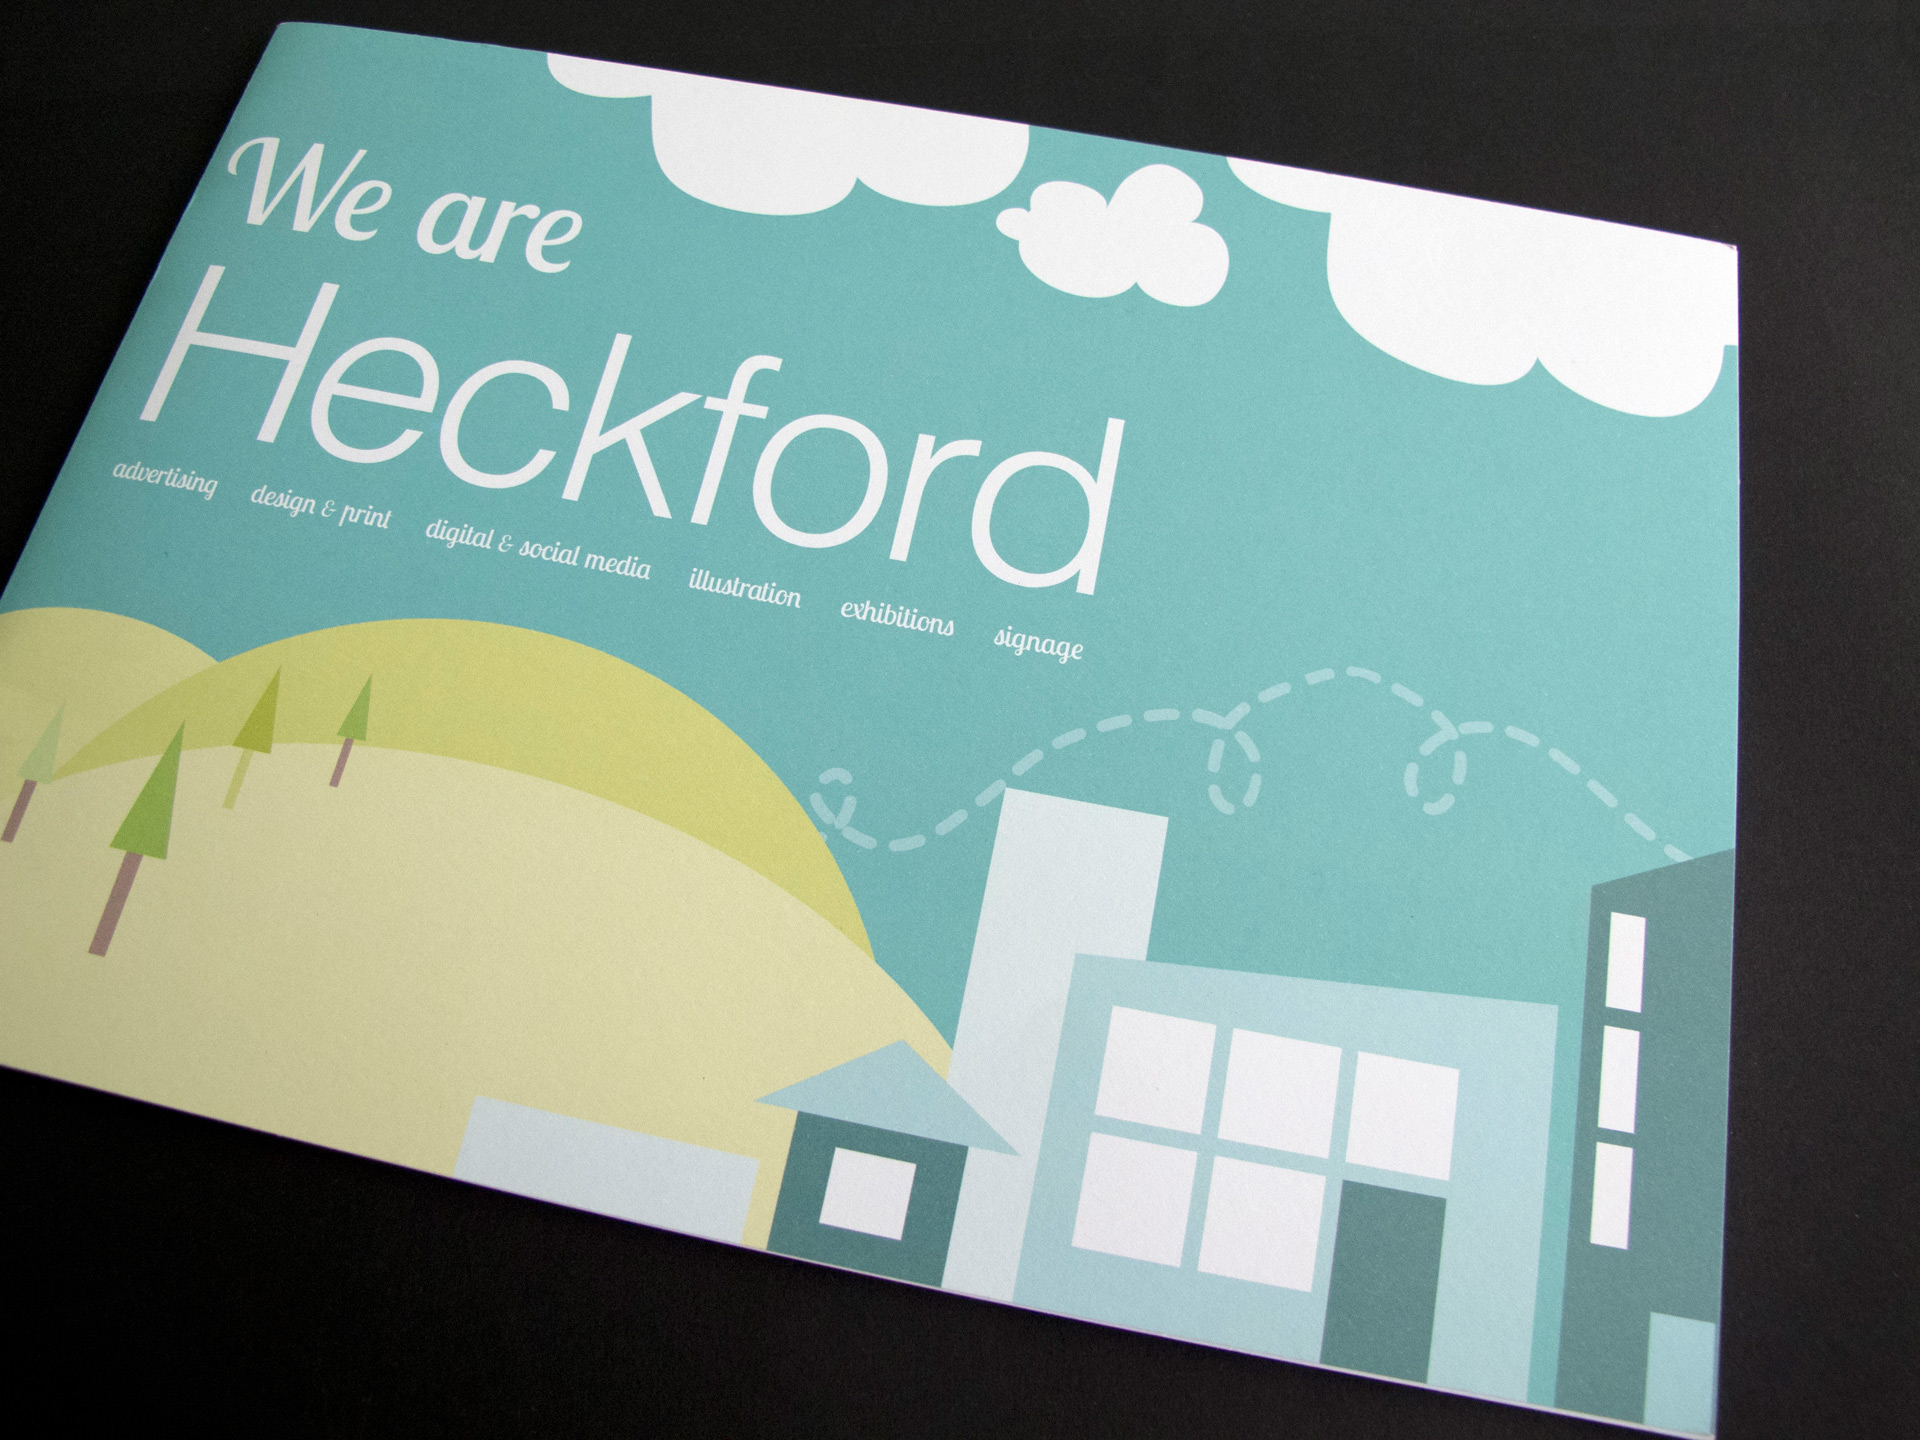 Photo of the brochure cover that depicts a vector illustration. There are green hills with trees on the left, and interlocking blue buildings on the right. There is a bright turquoise sky with white clouds and the words 'We are Heckford' in white text. The subheading lists Heckford's services.